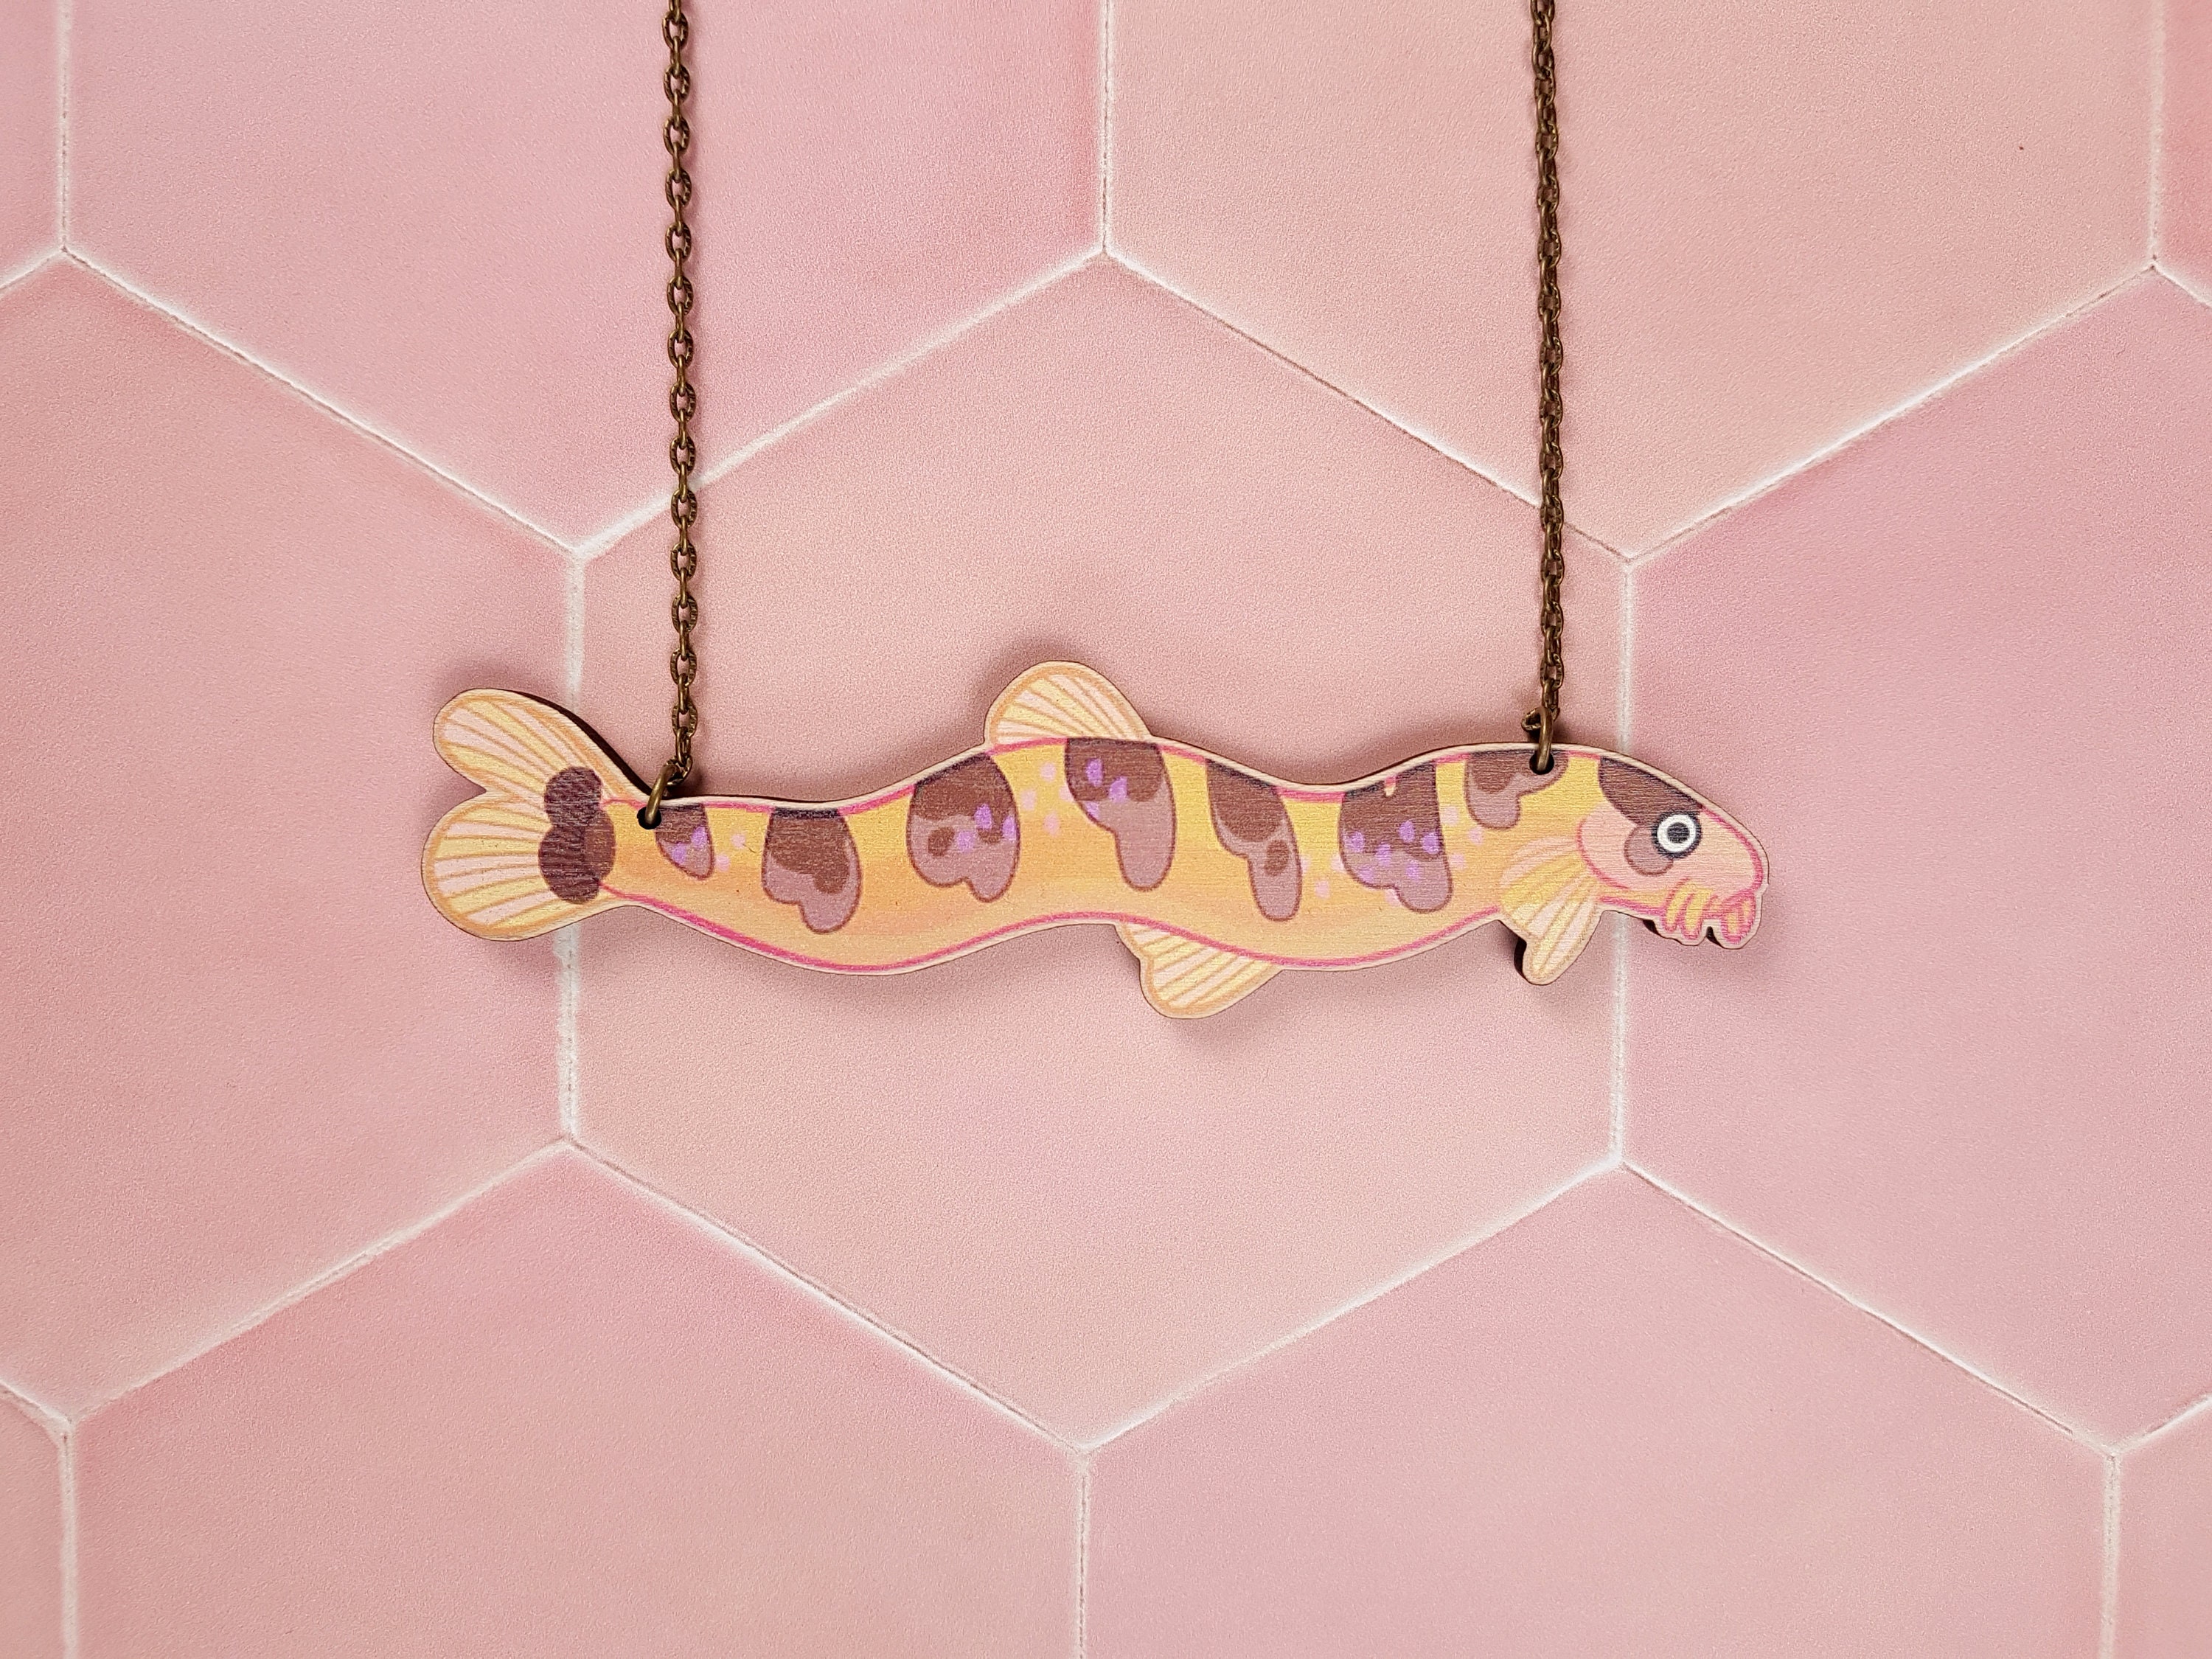 Chunky Kuhli Loach Fish Necklace Cool Quirky Weird Leopard Cinnamon Eel 